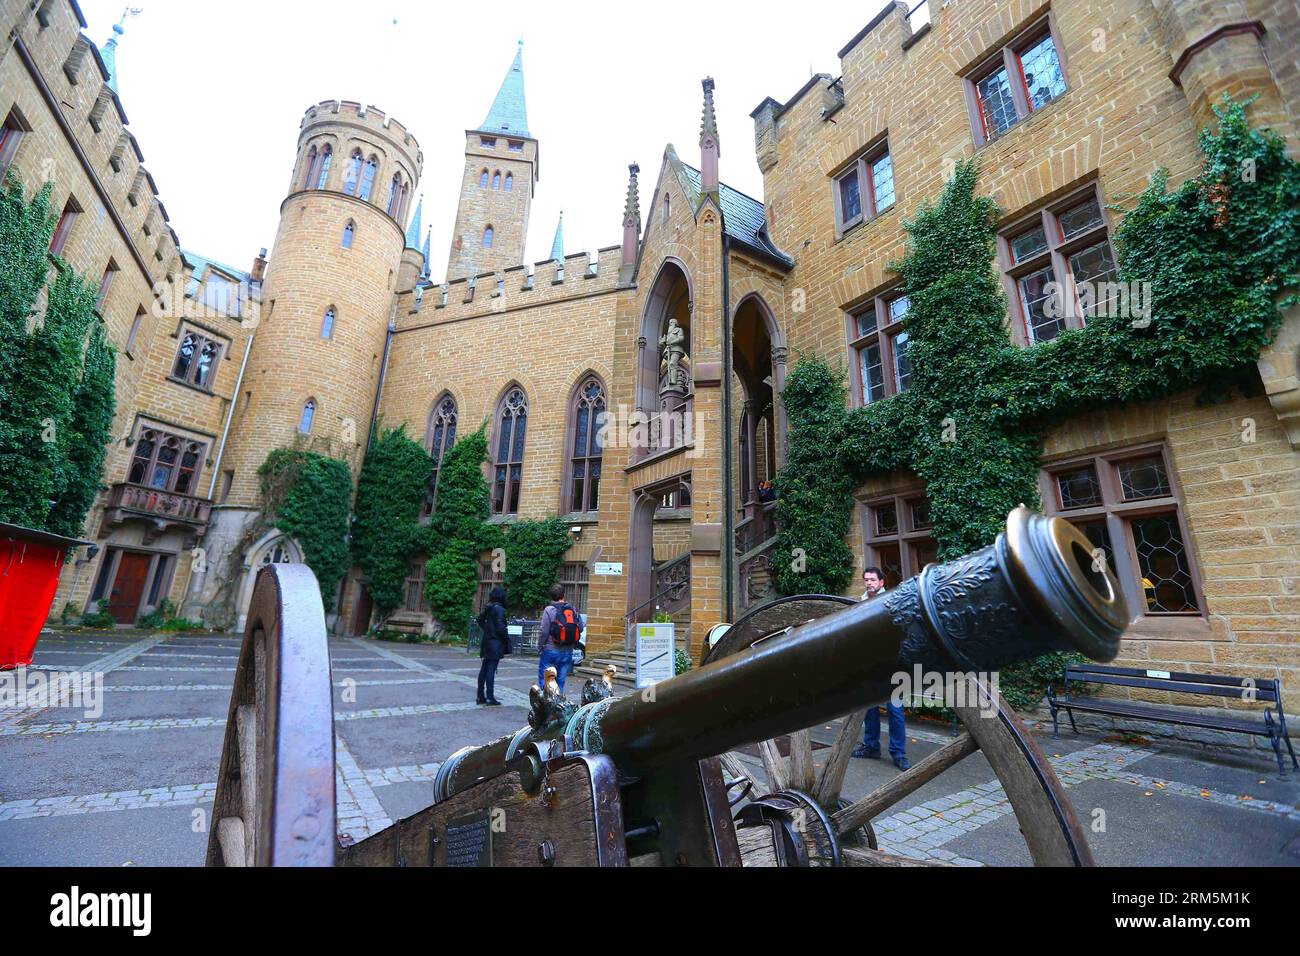 Bildnummer: 60684837  Datum: 02.11.2013  Copyright: imago/Xinhua Photo taken on Nov. 2, 2013 shows a part of the Burg Hohenzollern in Hechingen, Germany. Burg Hohenzollern is a castle considered to be the ancestral seat of the Hohenzollern family, which emerged in the Middle Ages and eventually became German Emperors. The castle was first constructed in the early 11th century and completely destroyed in 1423. The current version of the castle was rebuilt in mid-19th century. The castle becomes a popular tourist destination today as it is still privately owned by the descendants of the Hohenzol Stock Photo